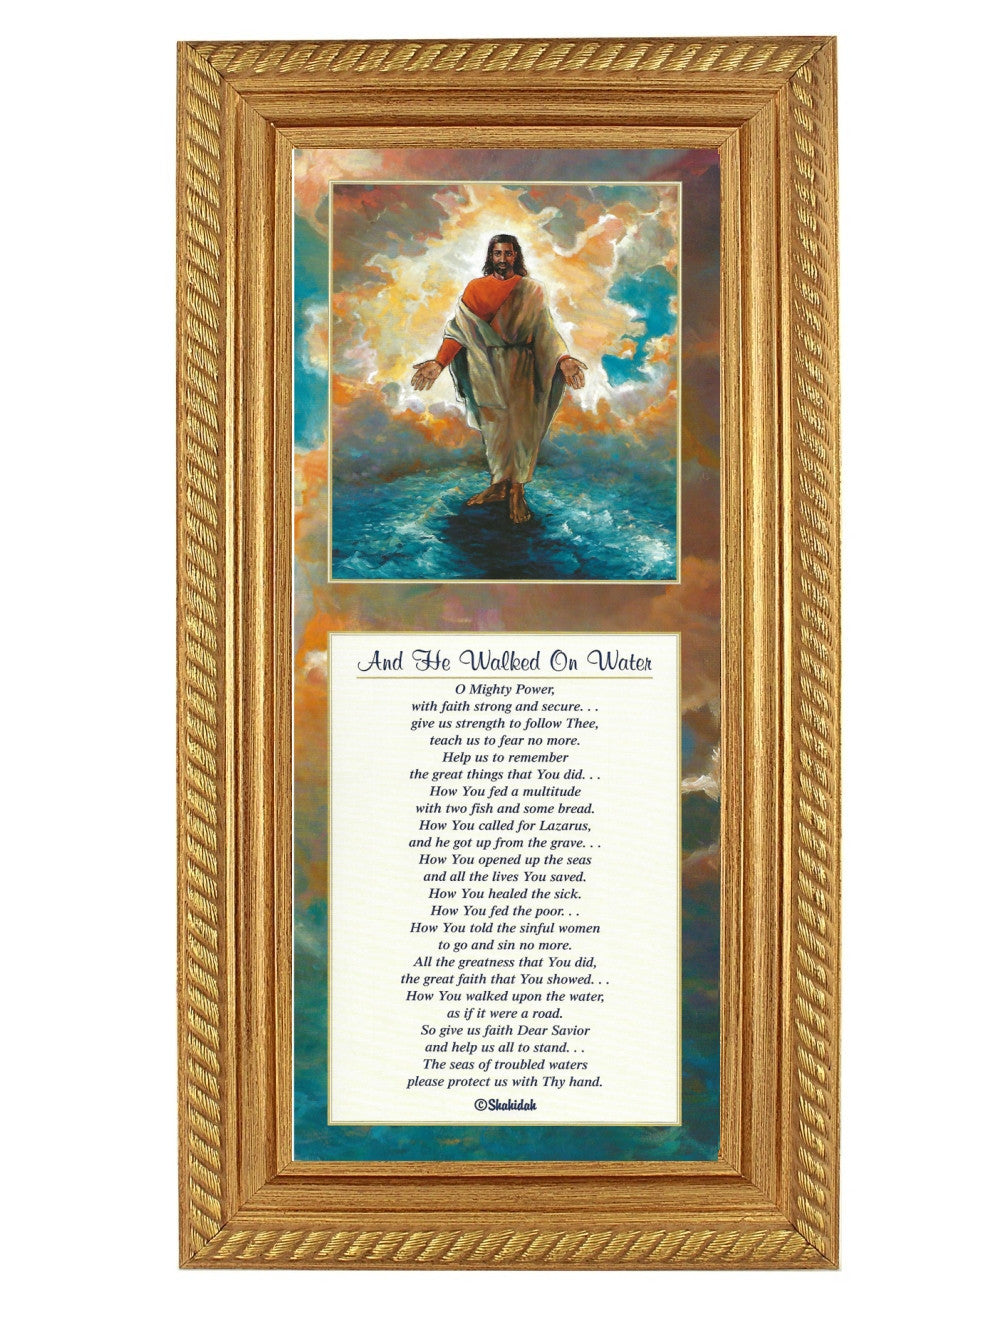 And He Walked on Water by Katherine Roundtree and Shahidah (Gold Frame)